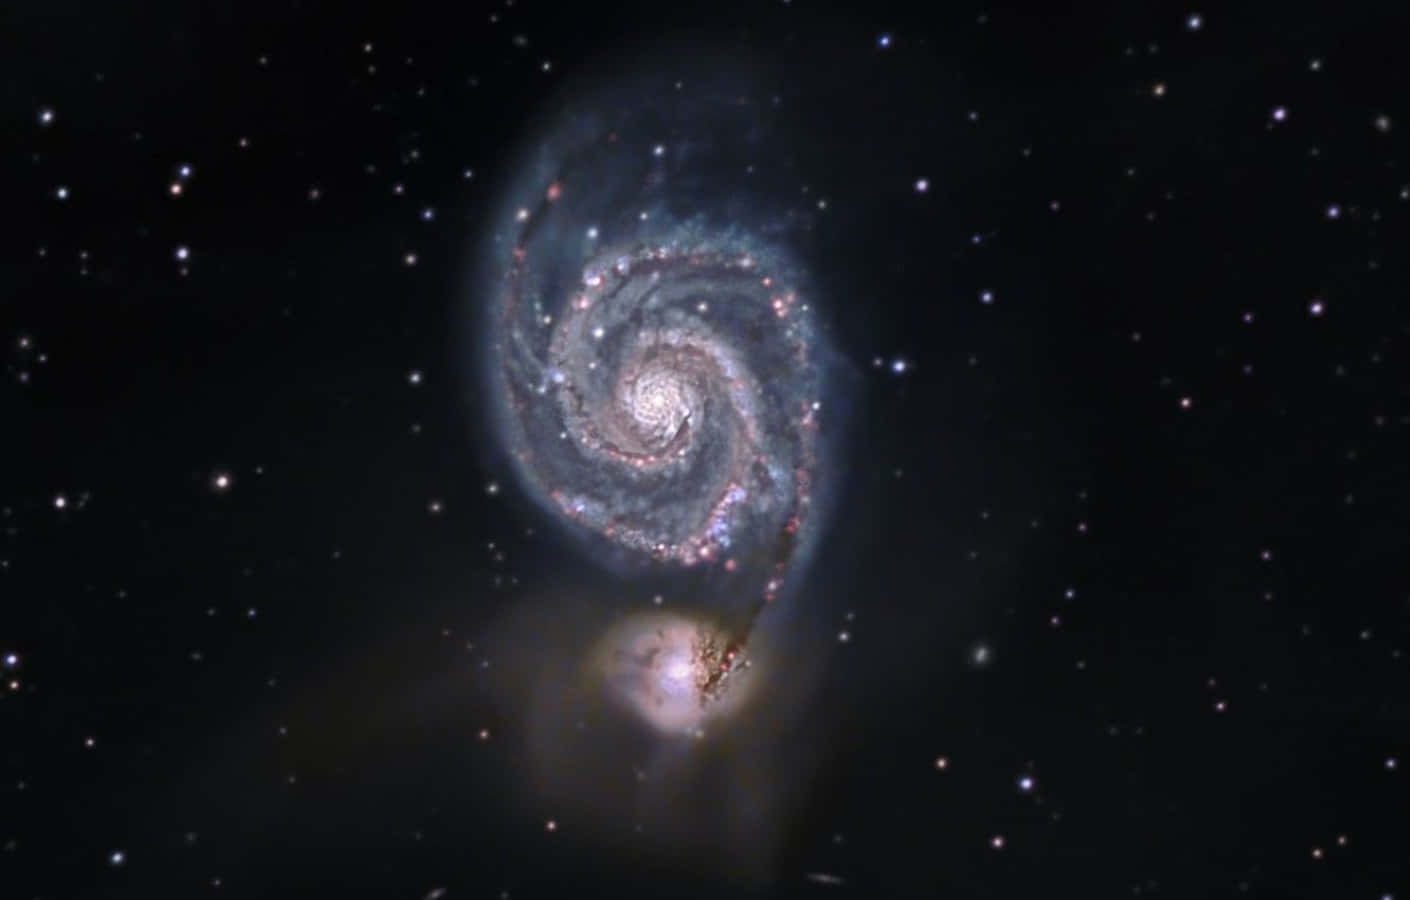 Captivating Whirlpool Galaxy in the Night Sky Wallpaper